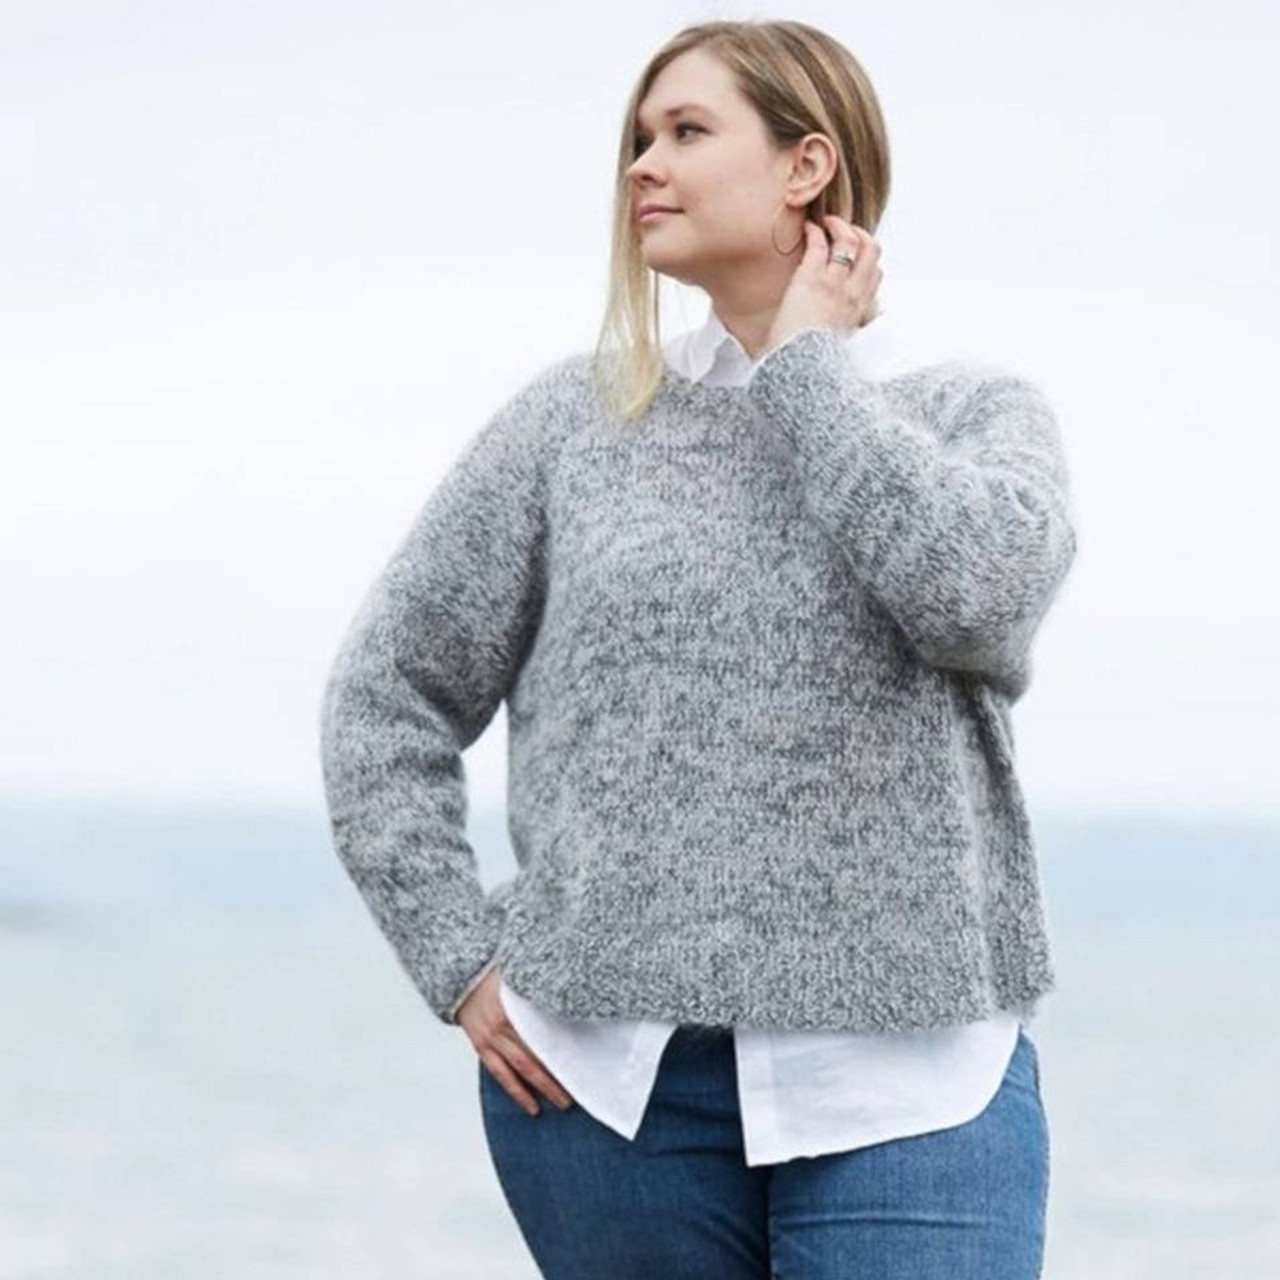 Churchmouse Pattern Easy Relaxed Pullover - The Websters